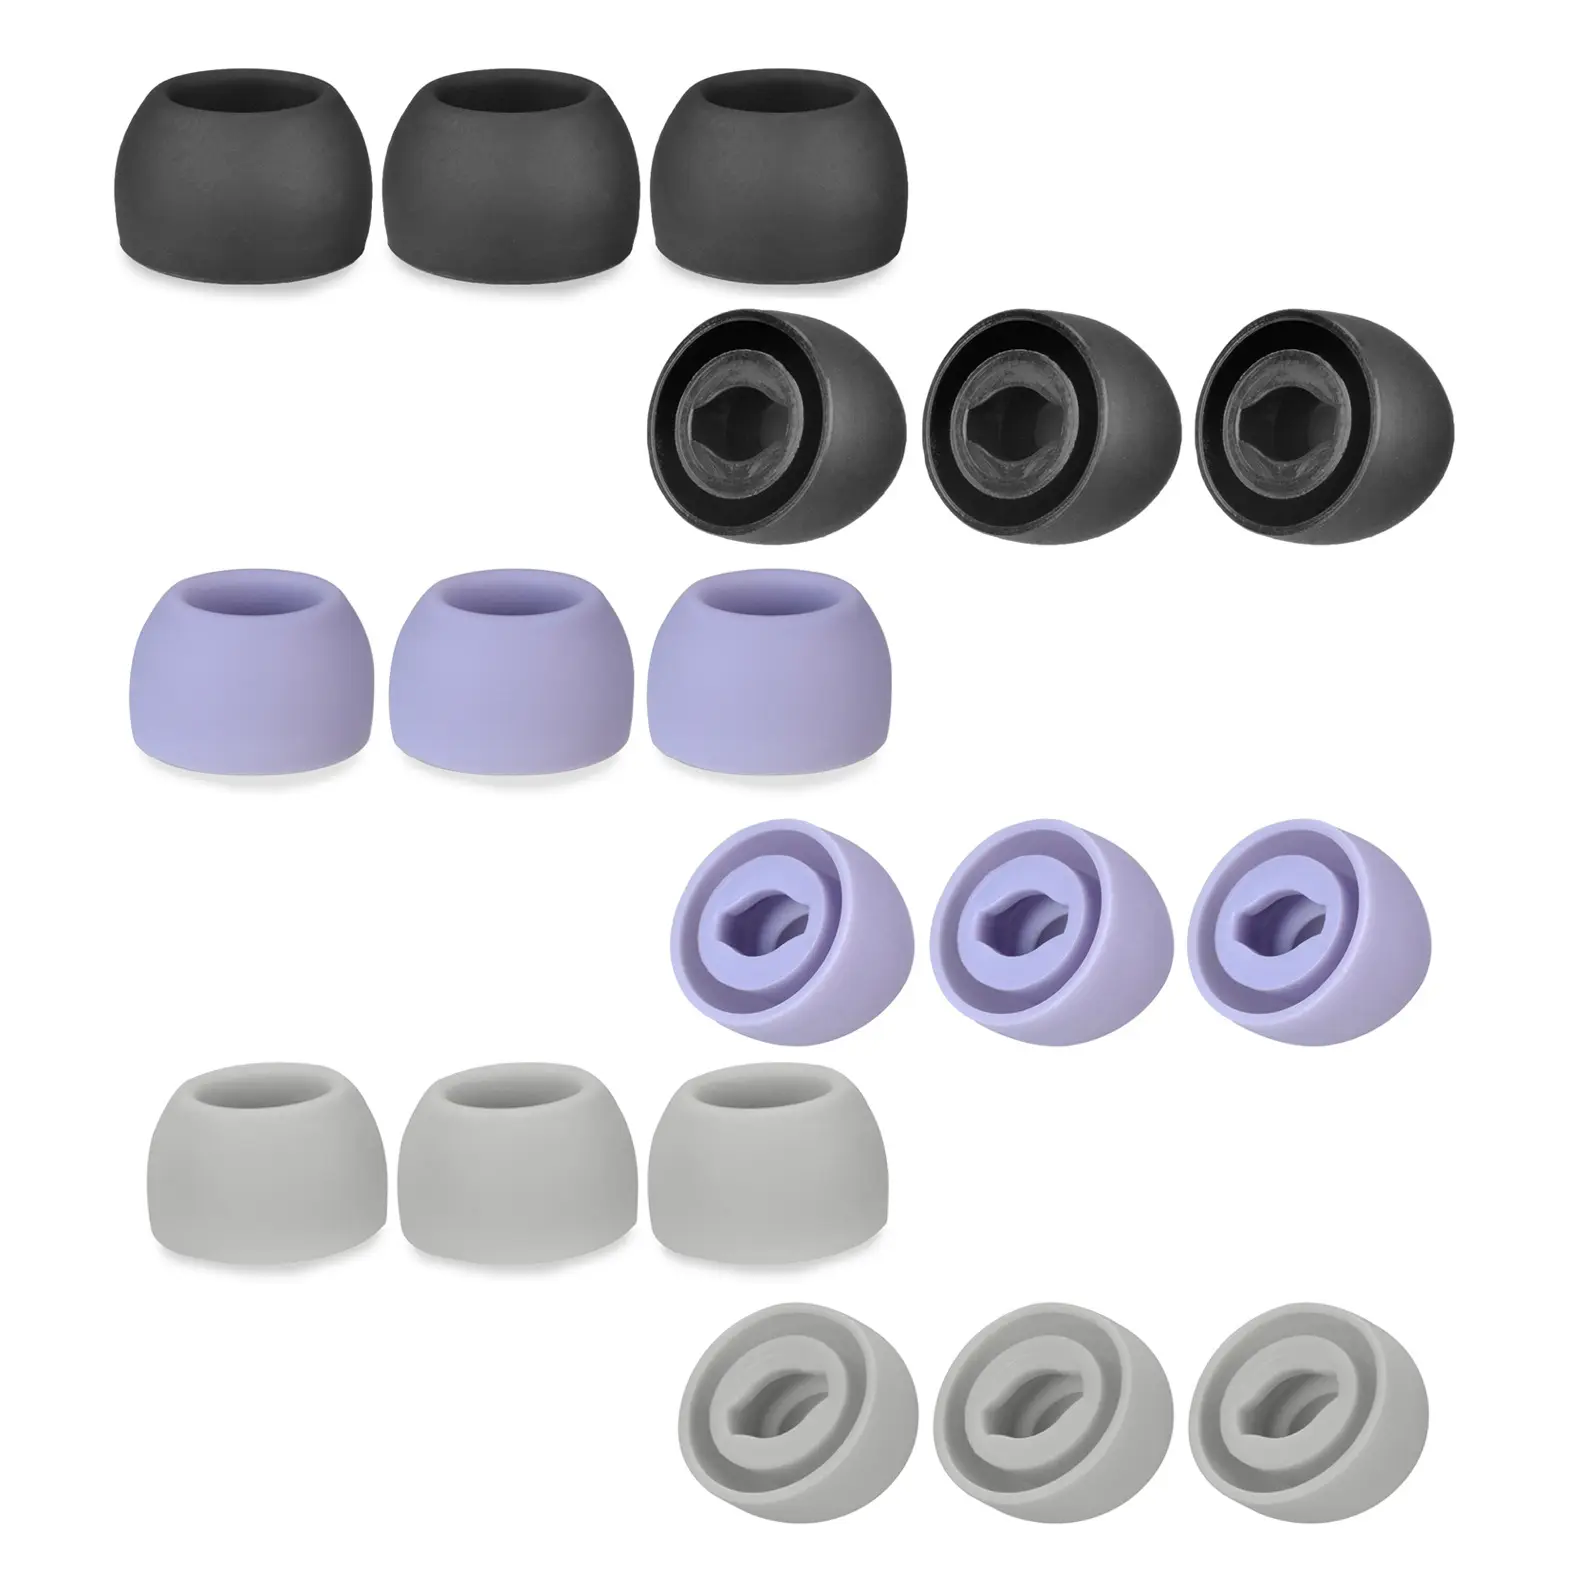 Defean TWS Silicone Replacement Earbud Ear Buds Tips for Samsung Galaxy Buds Pro